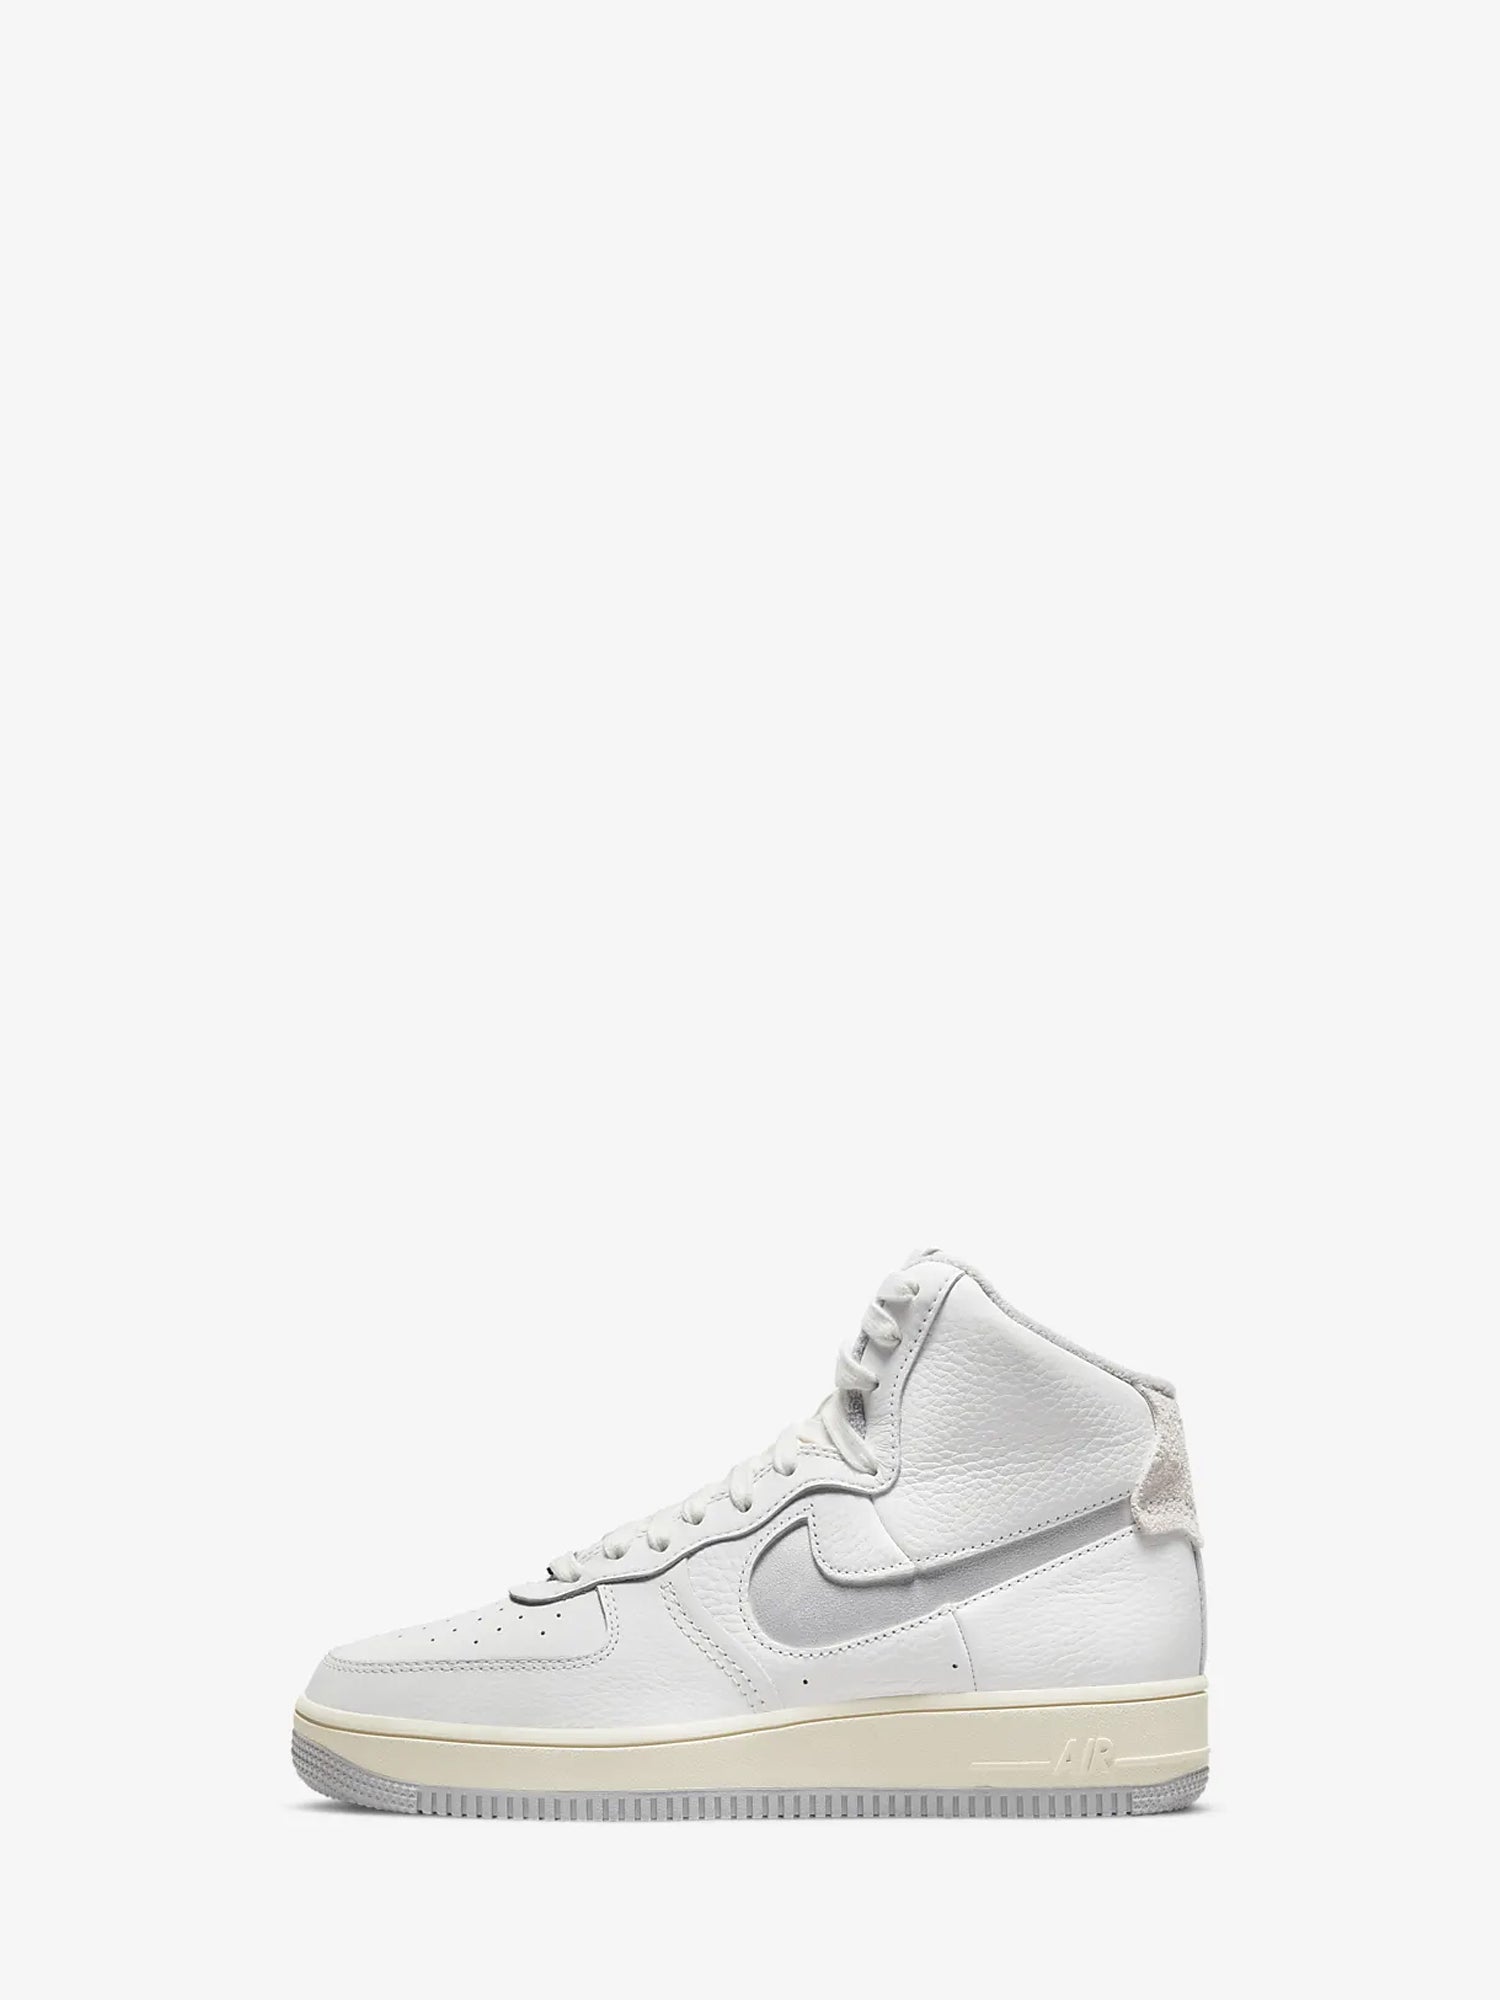 NIKE SNEAKERS ALTE AIR FORCE 1 HIGH SCULPT BIANCO-ARGENTO